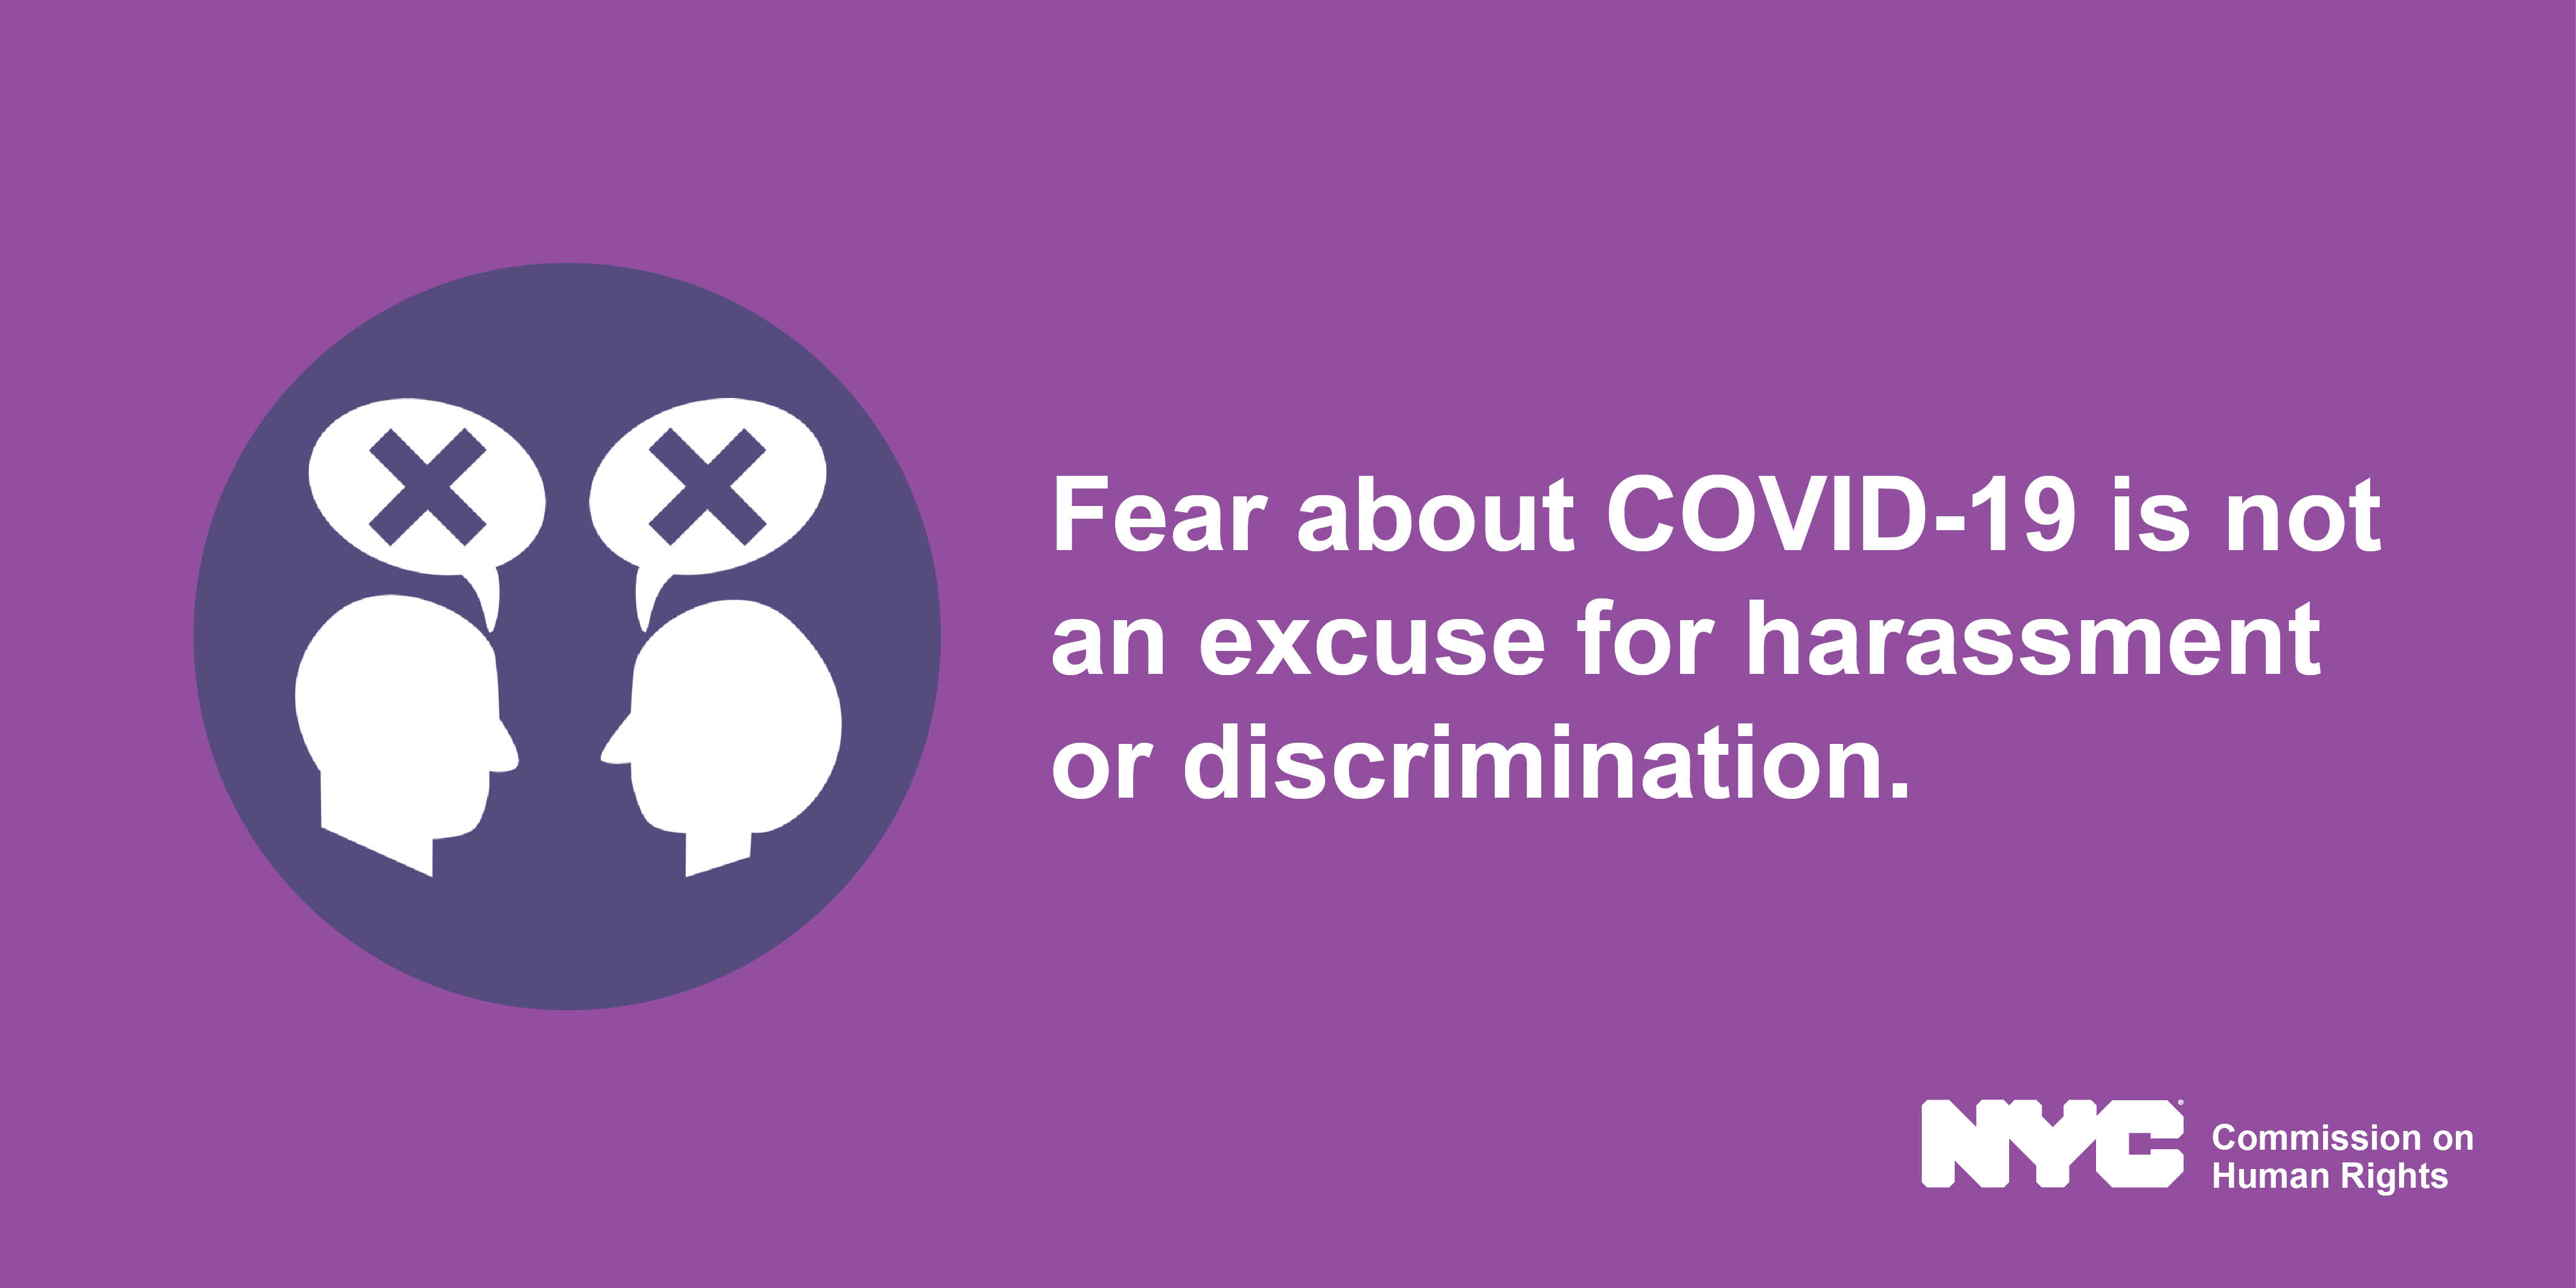 Purple image with a silhouette of two heads talking, each with an "X" in a speech bubble above them.  Text on the right says "Fear about COVID-19 is not an excuse for harassment or discrimination."  NYC Commission on Human Rights logo appears in bottom right corner.